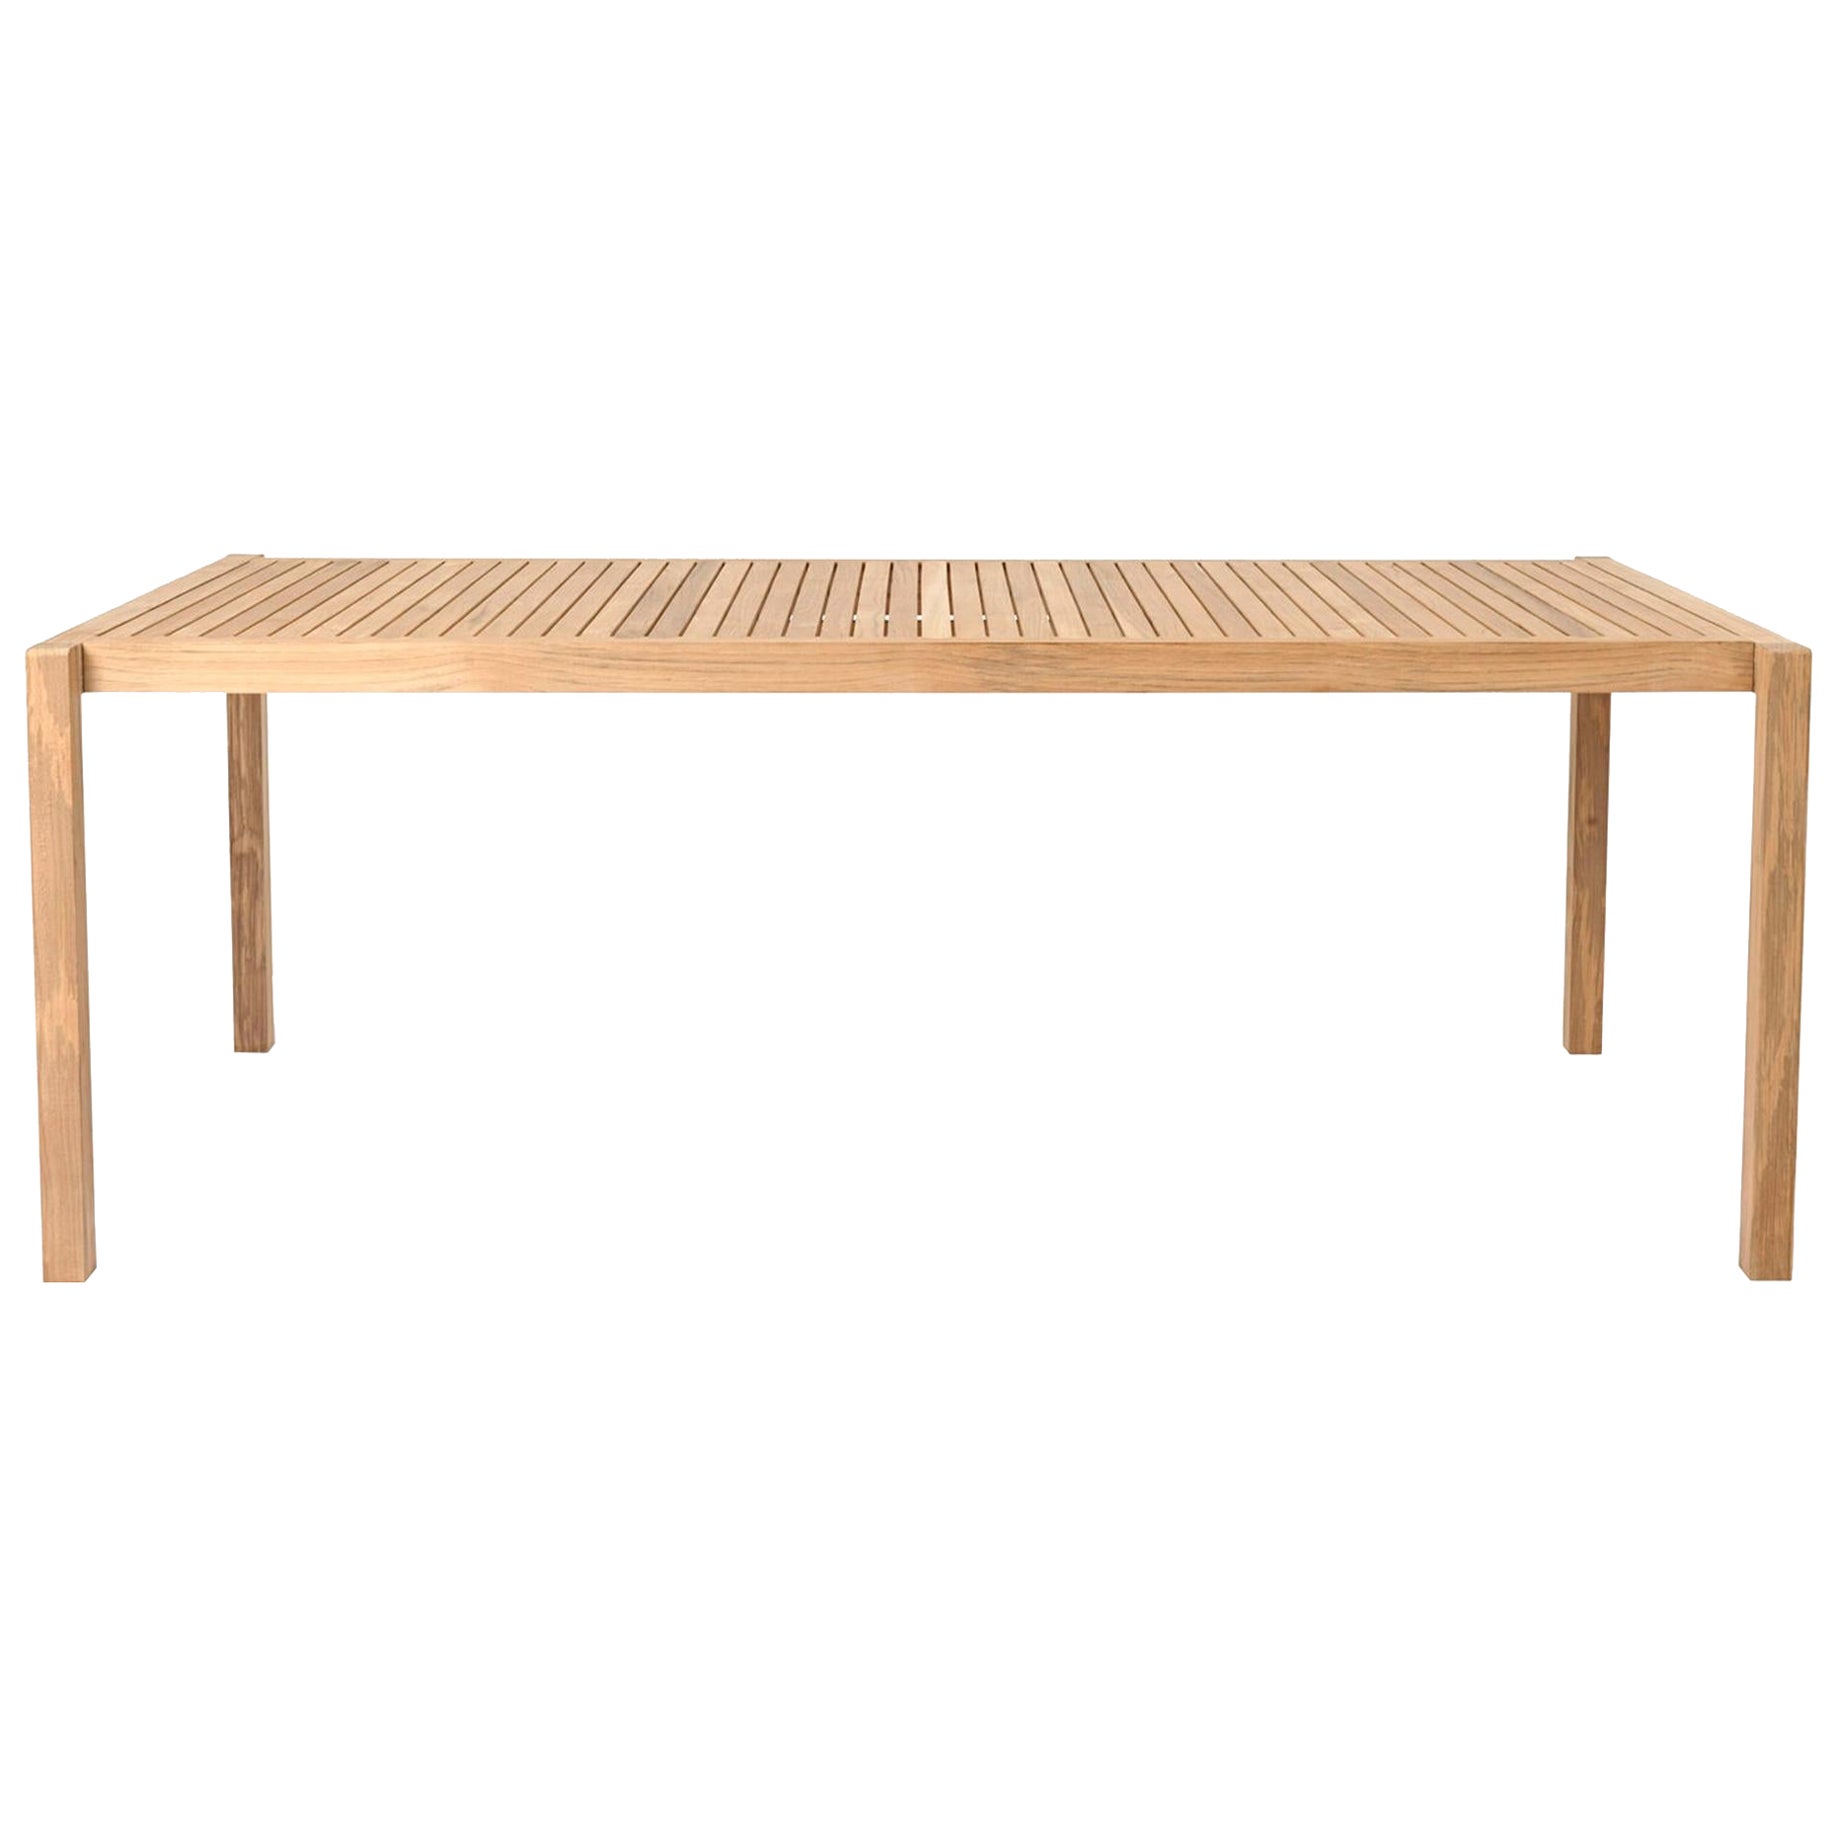 AH901 Outdoor Dining Table in Untreated Teak *Quickship* For Sale